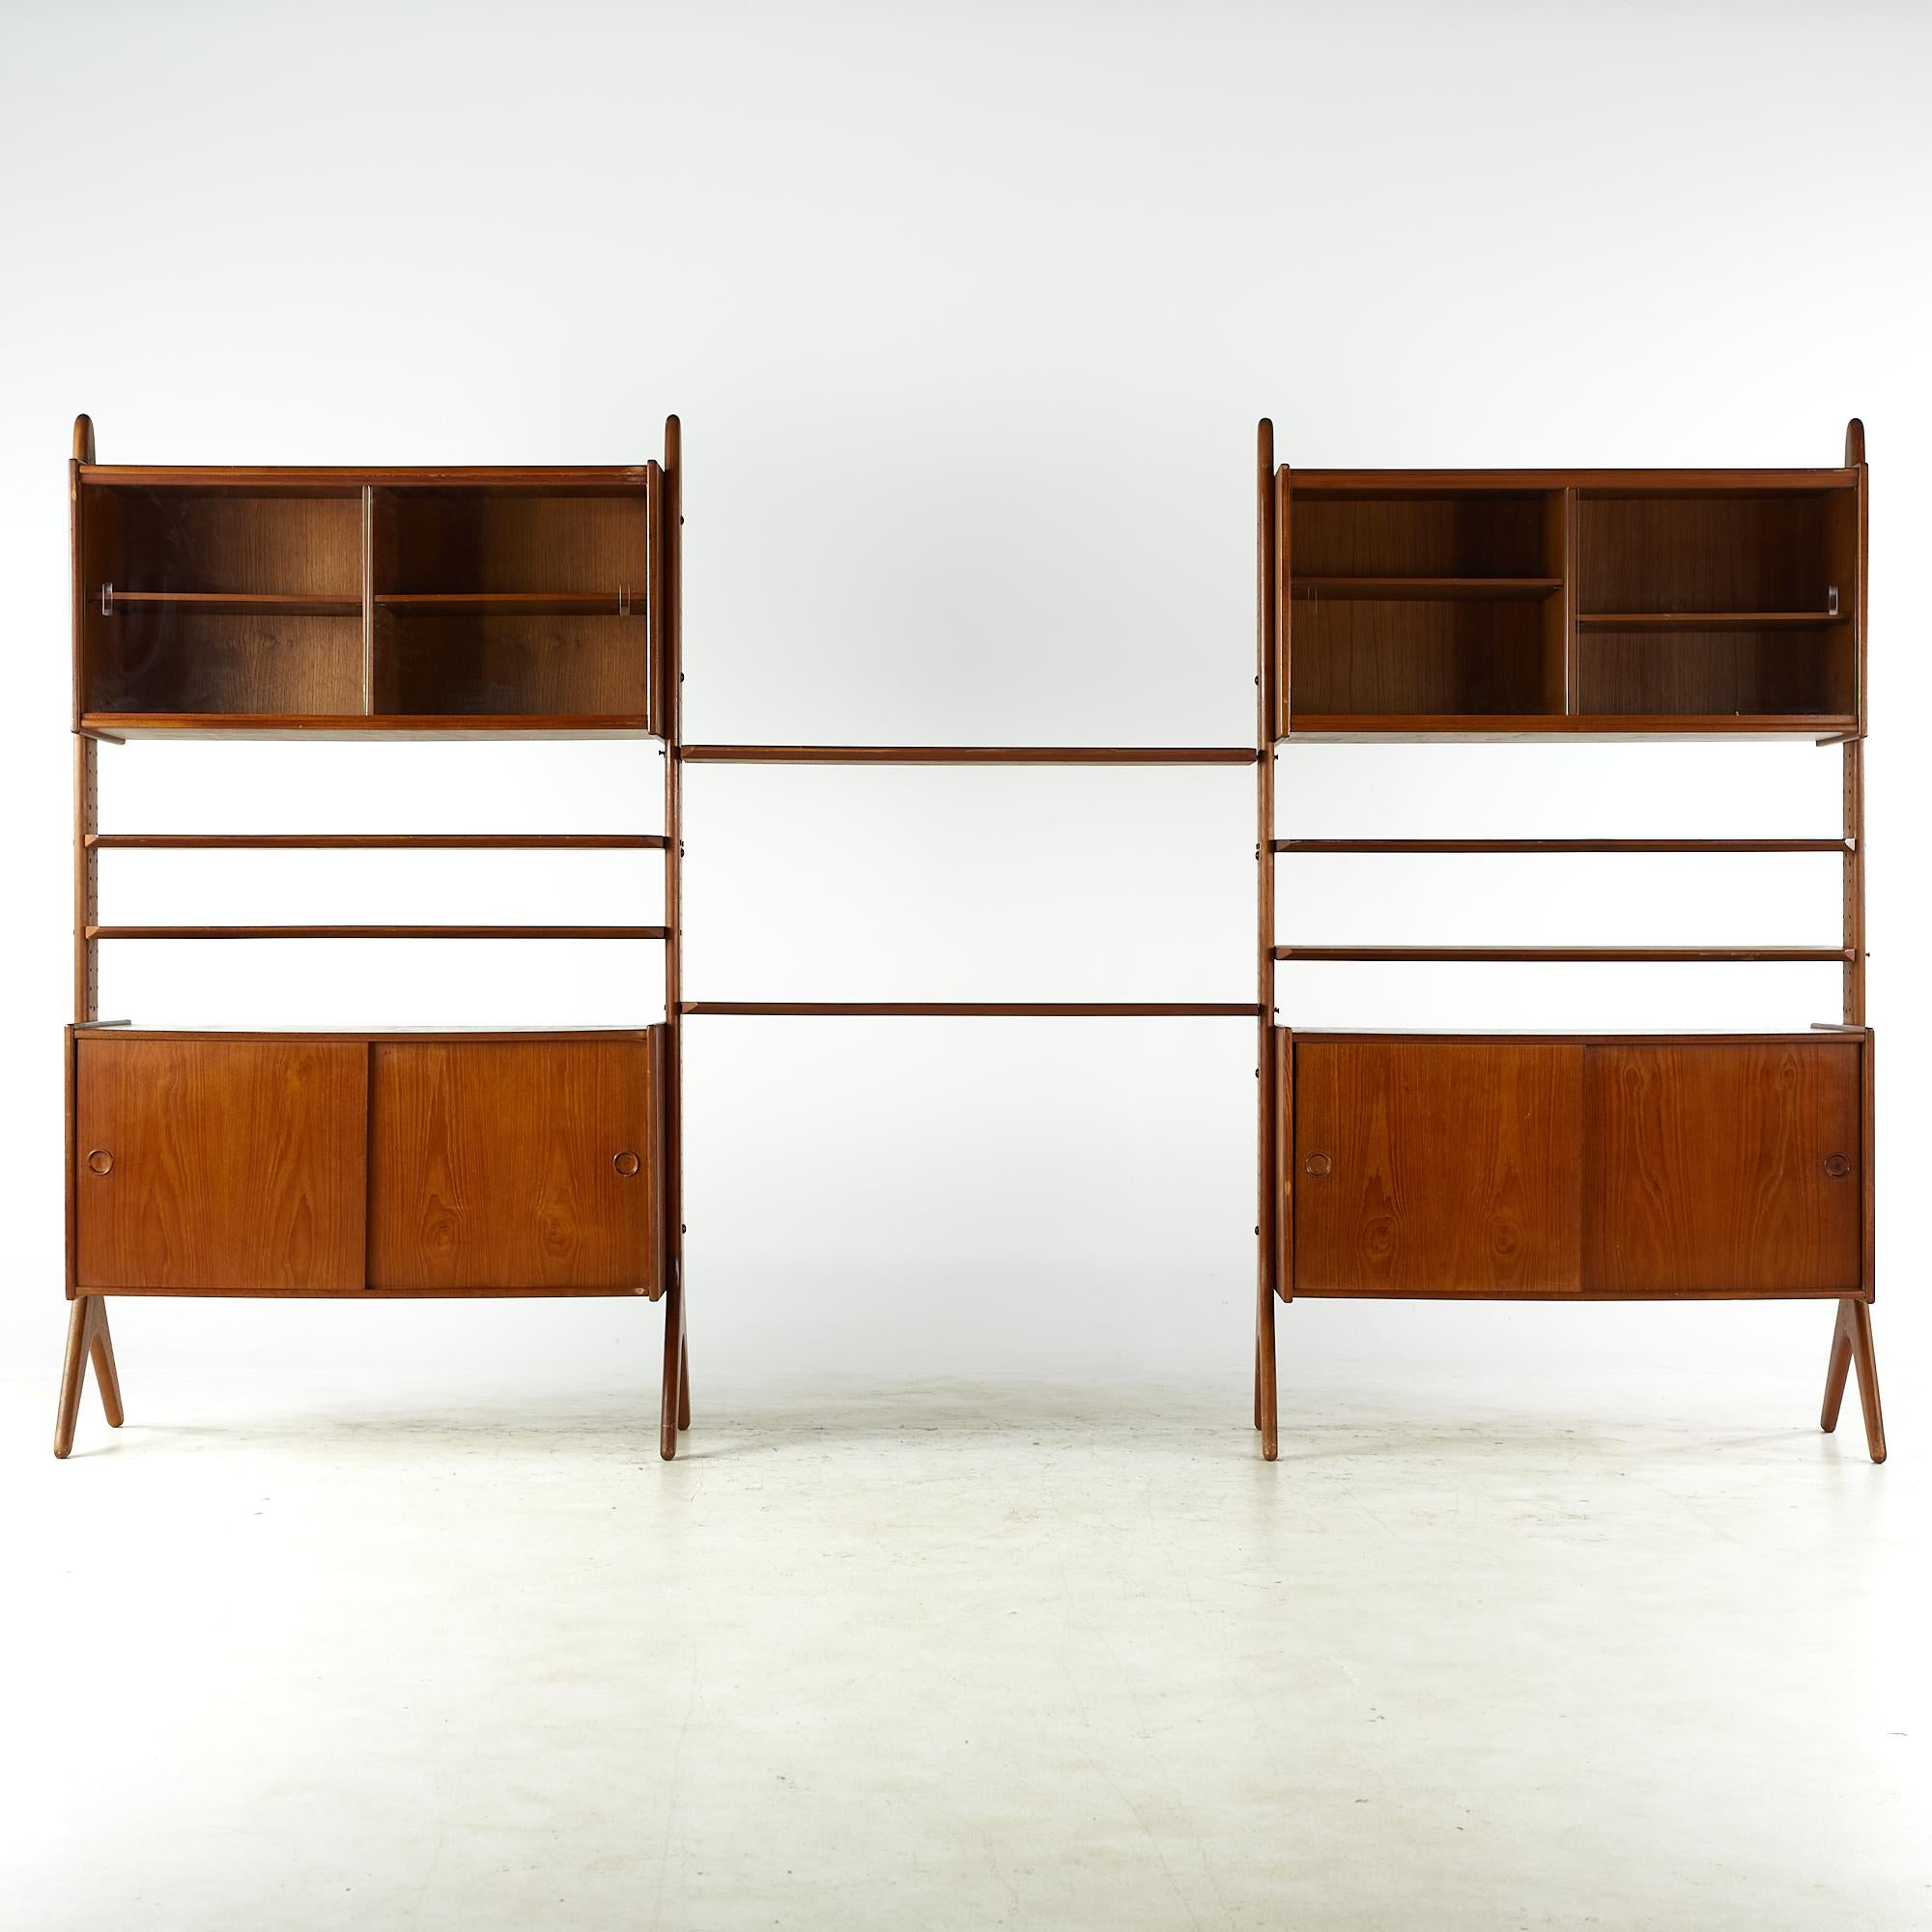 Erik Buch midcentury 3 bay teak Freestanding wall unit

This wall unit measures: 123 wide x 17.5 deep x 70.75 inches high

All pieces of furniture can be had in what we call restored vintage condition. That means the piece is restored upon